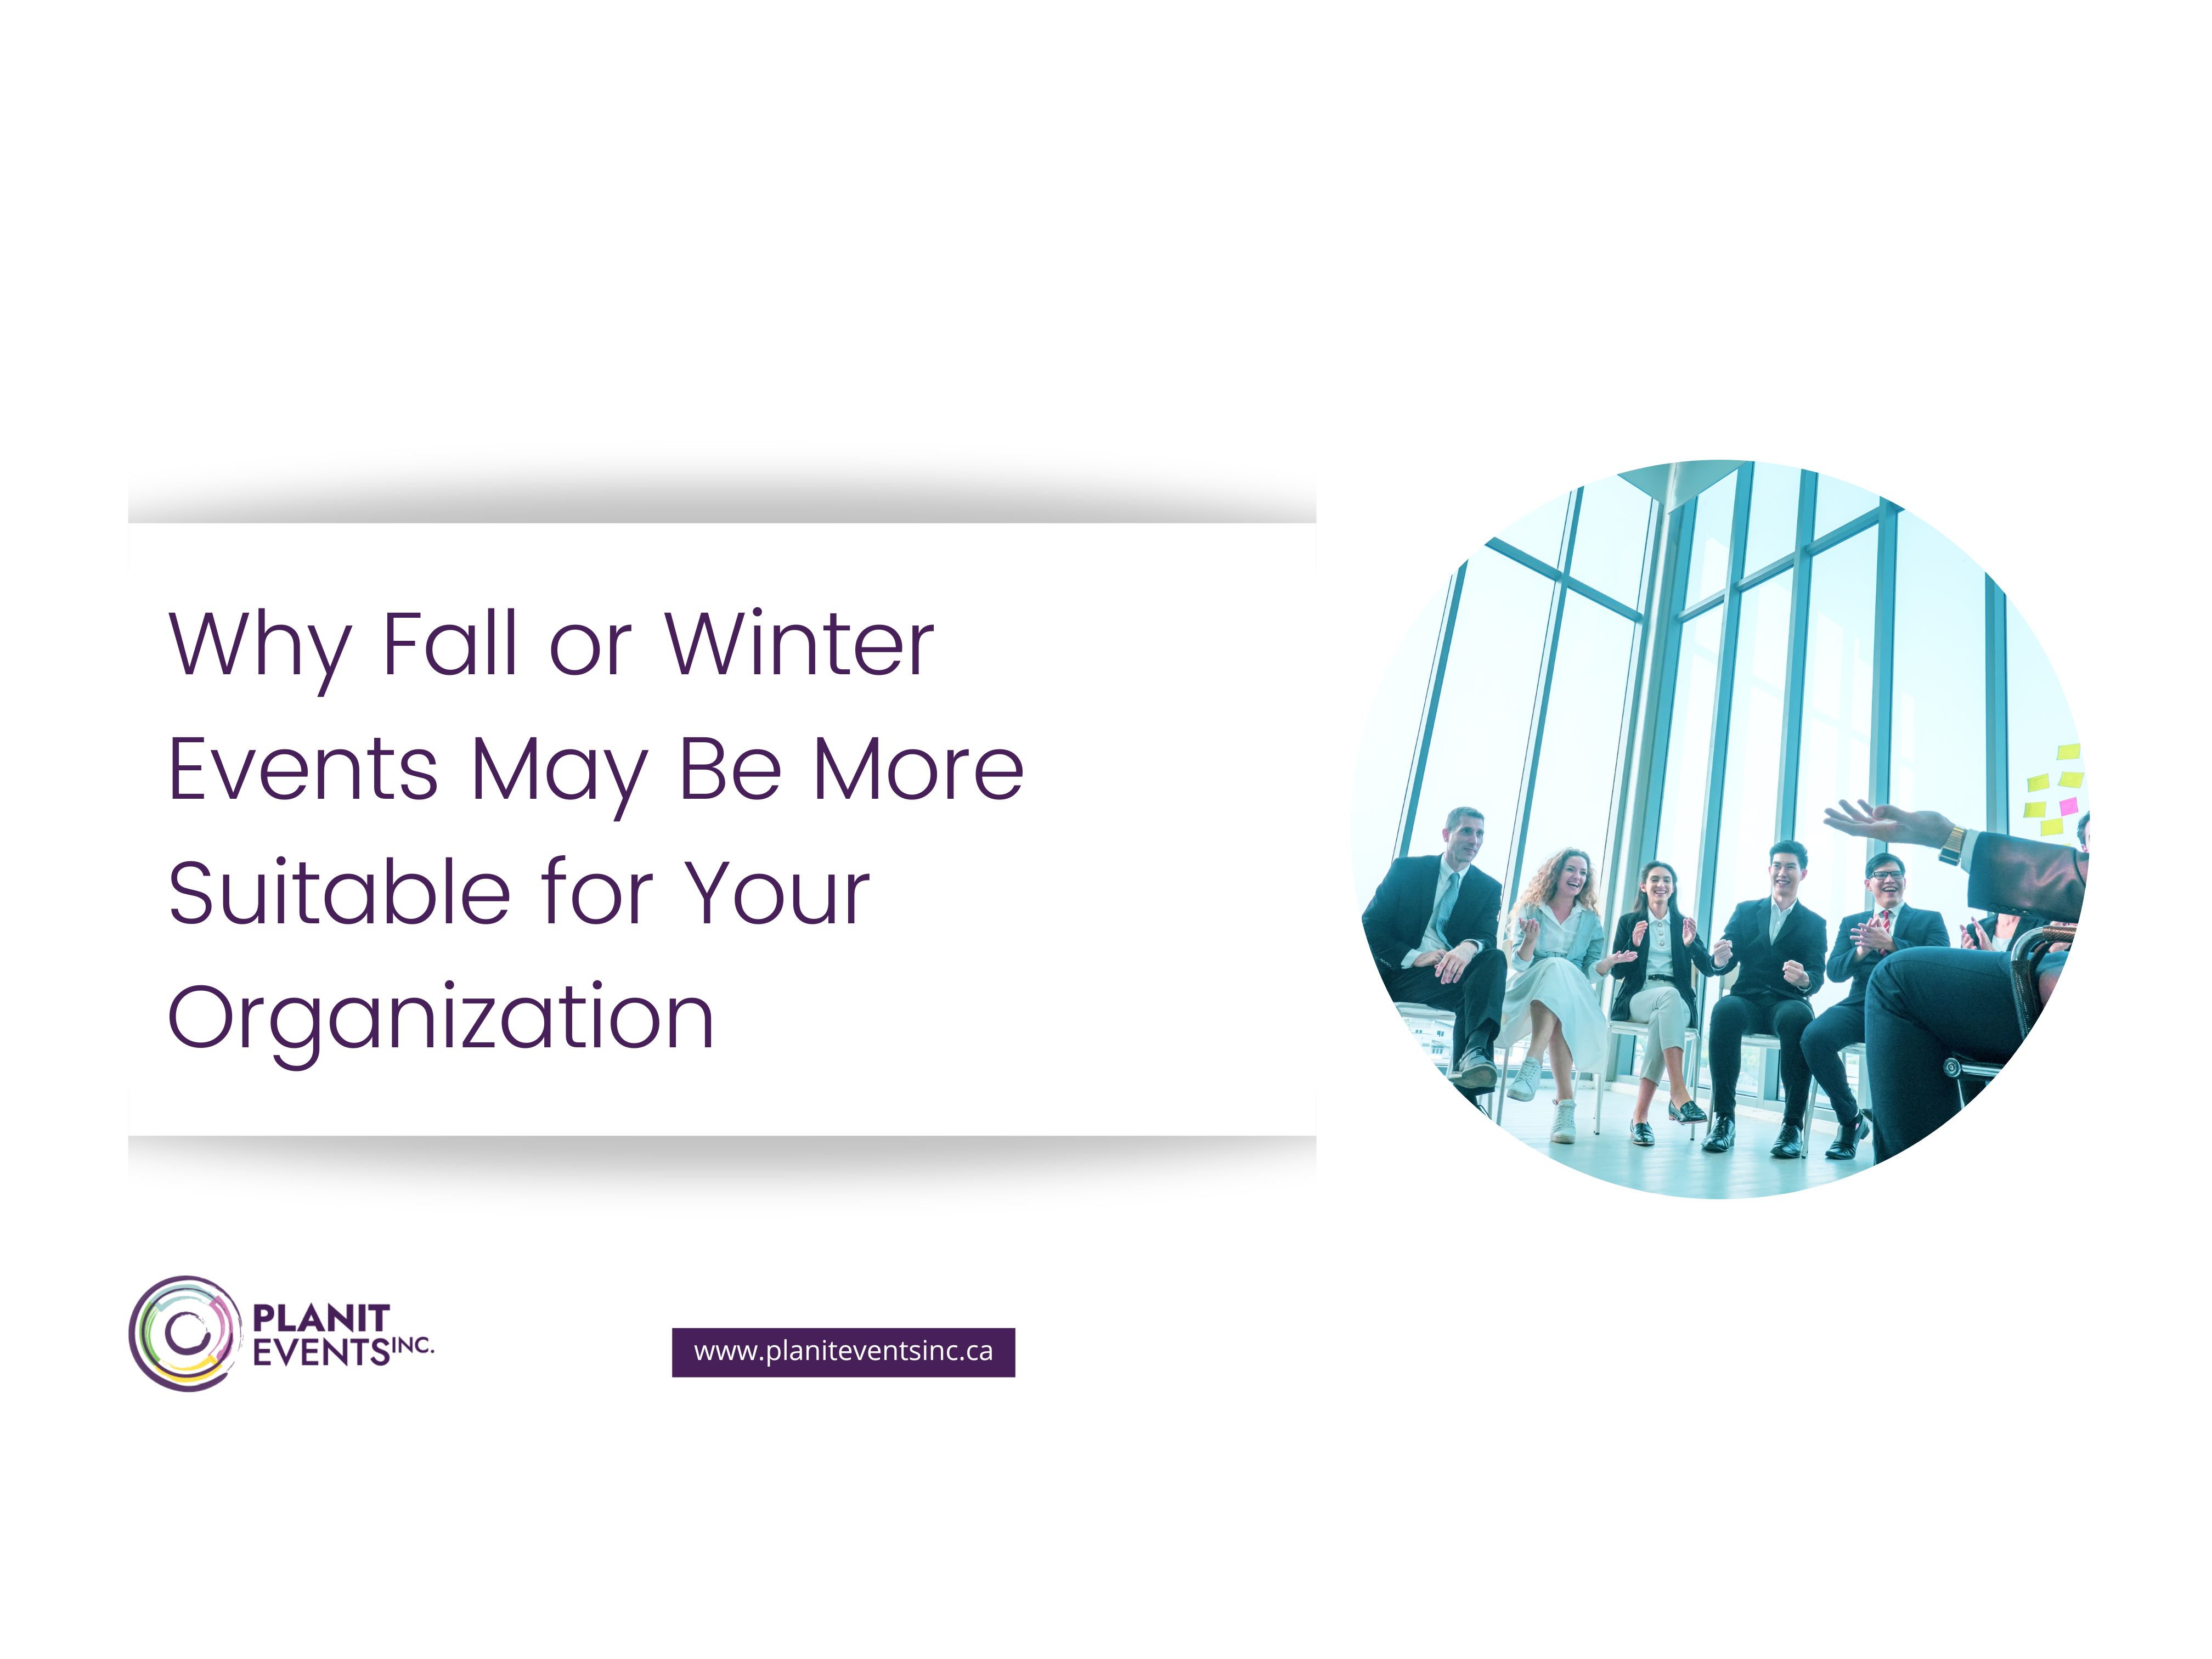 Why Fall or Winter Events May Be More Suitable for Your Organization